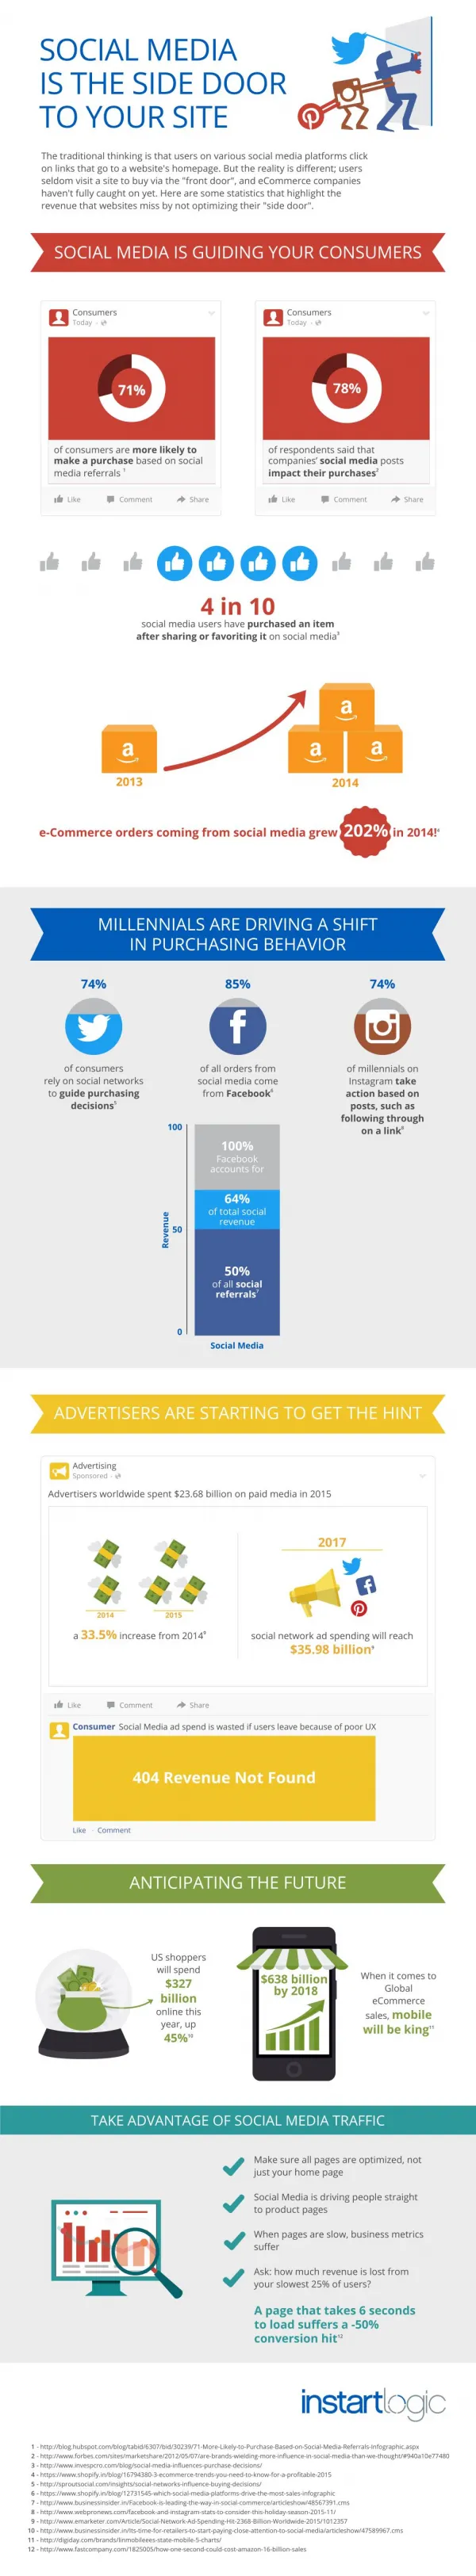 Infographic: Social Media Is The Side Door To Your Site